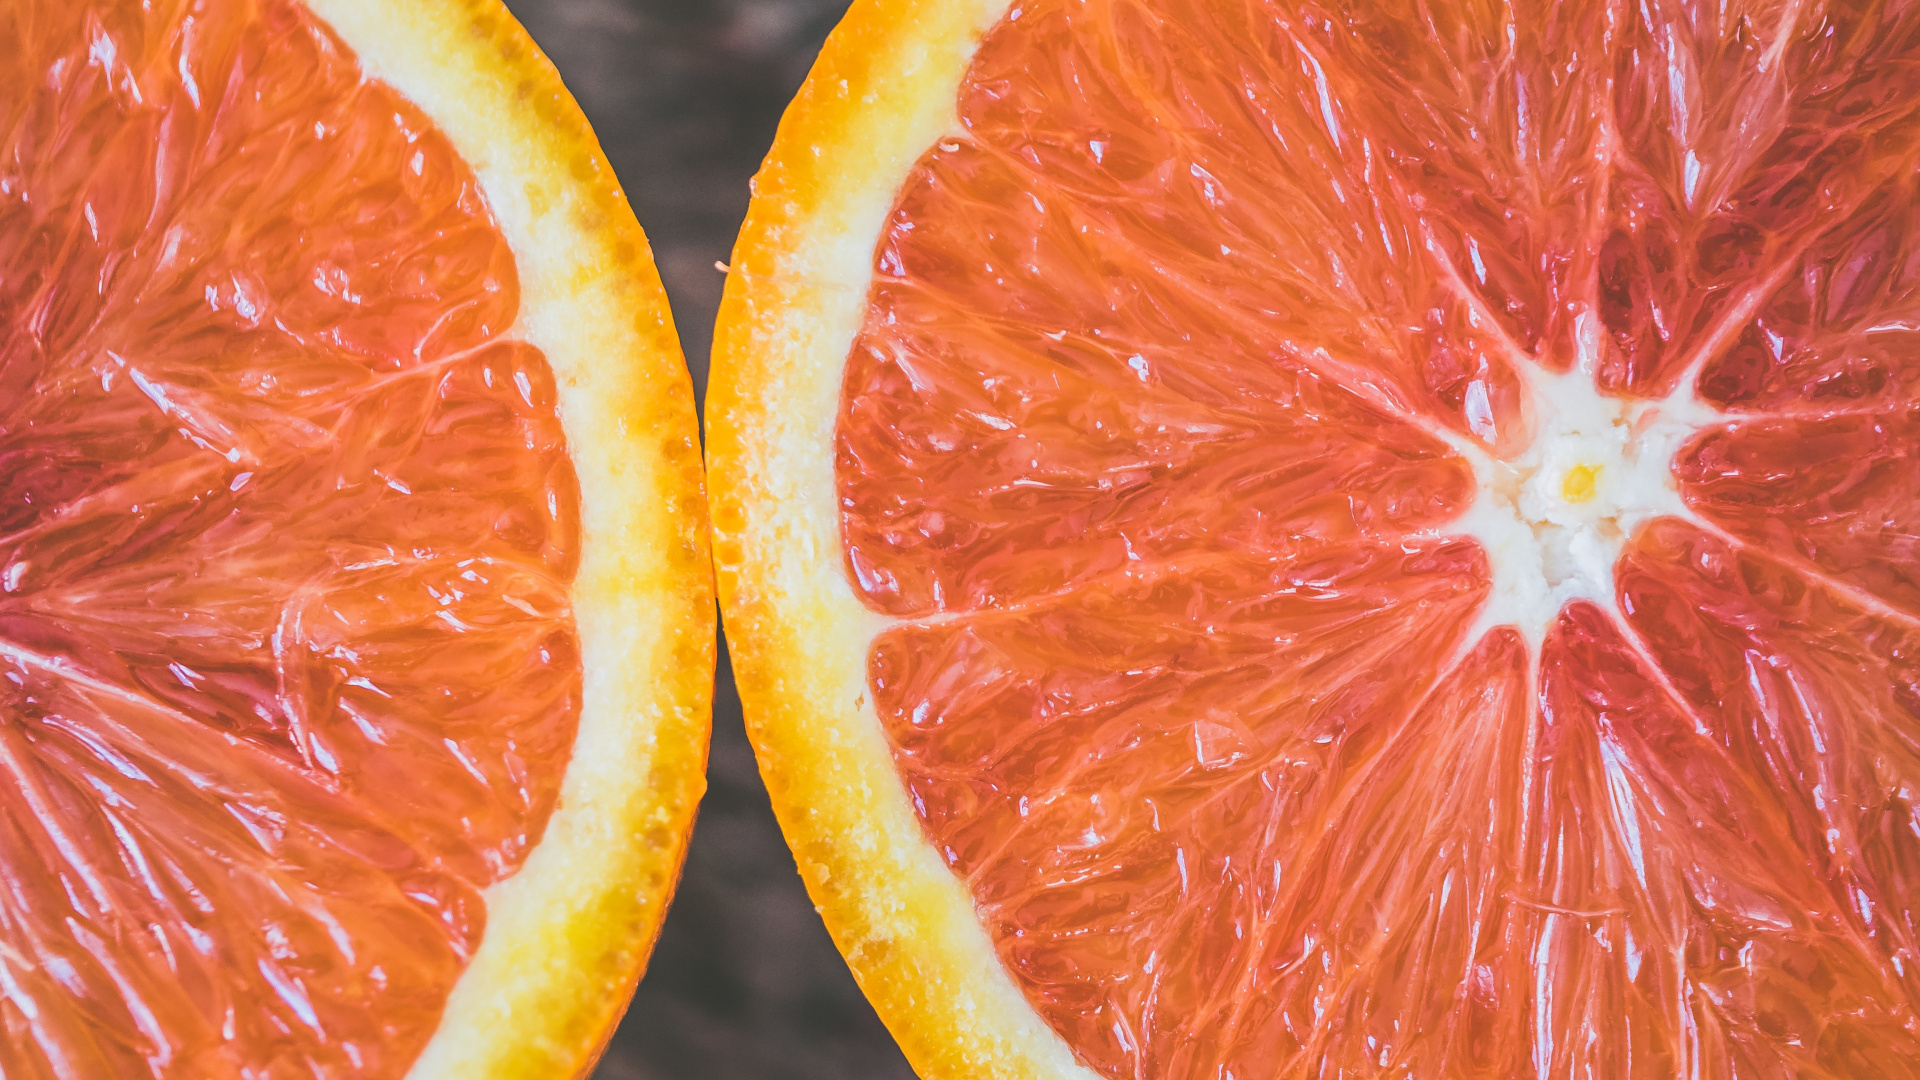 Sliced Orange Fruit in Close up Photography. Wallpaper in 1920x1080 Resolution